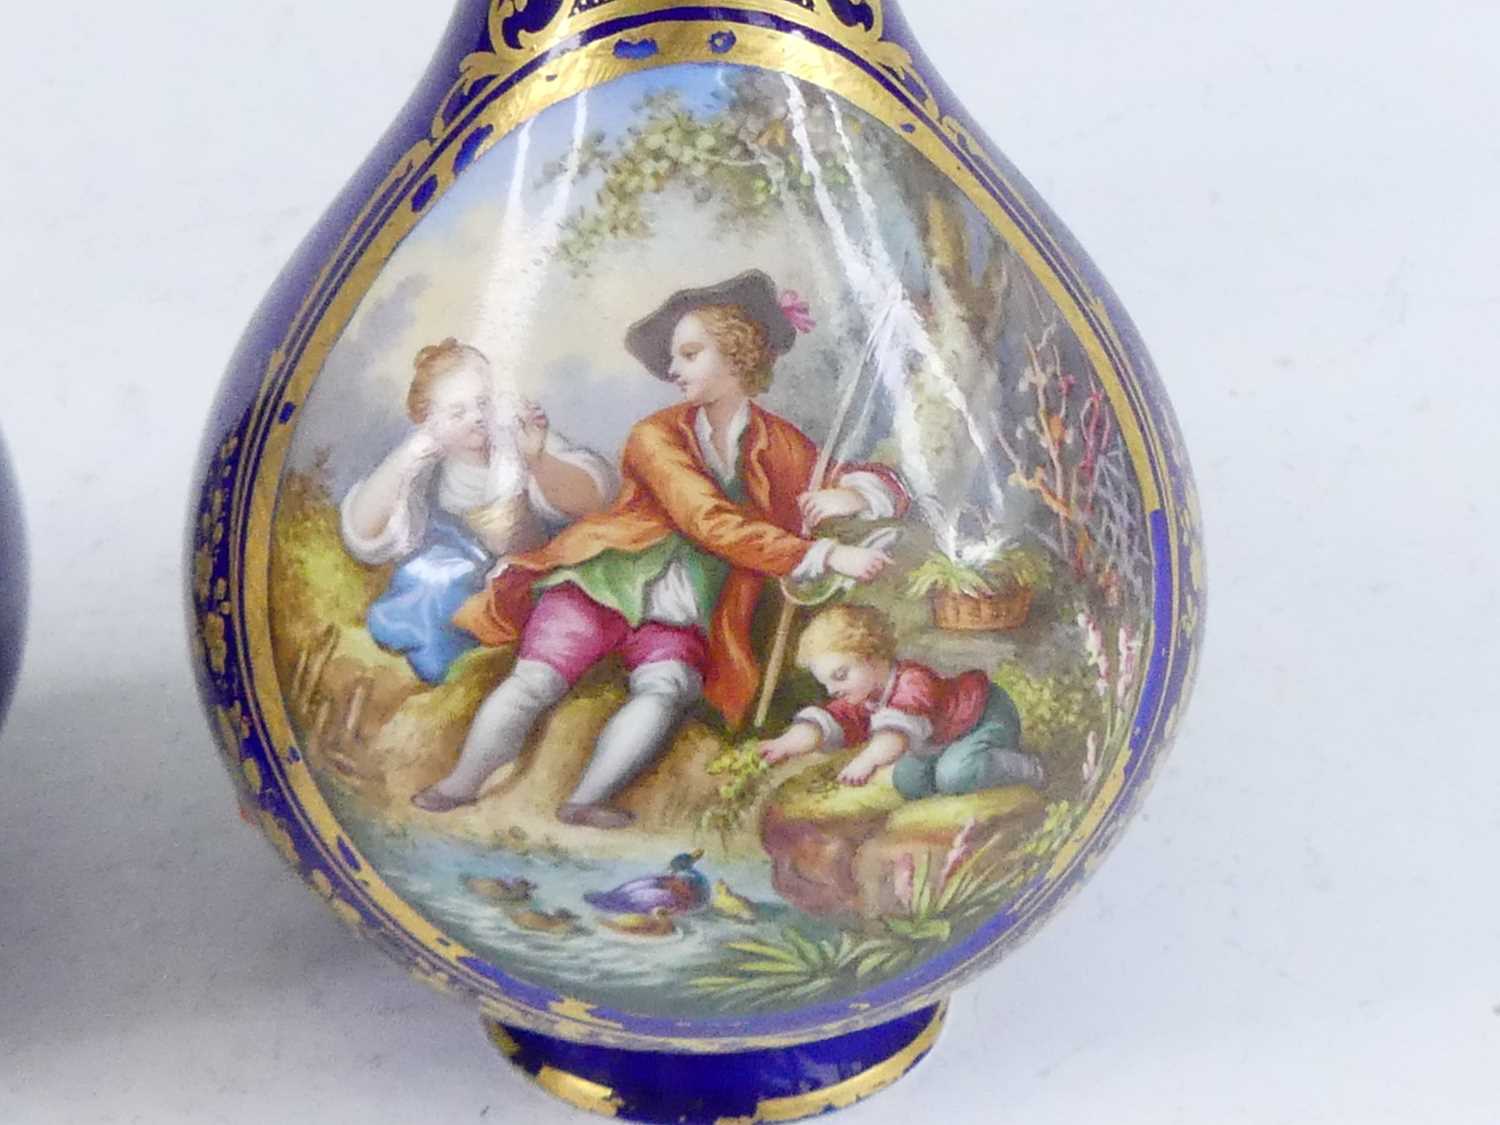 A pair of Sevres porcelain vases, 19th century, each decorated with children in 18th century dress - Image 3 of 9